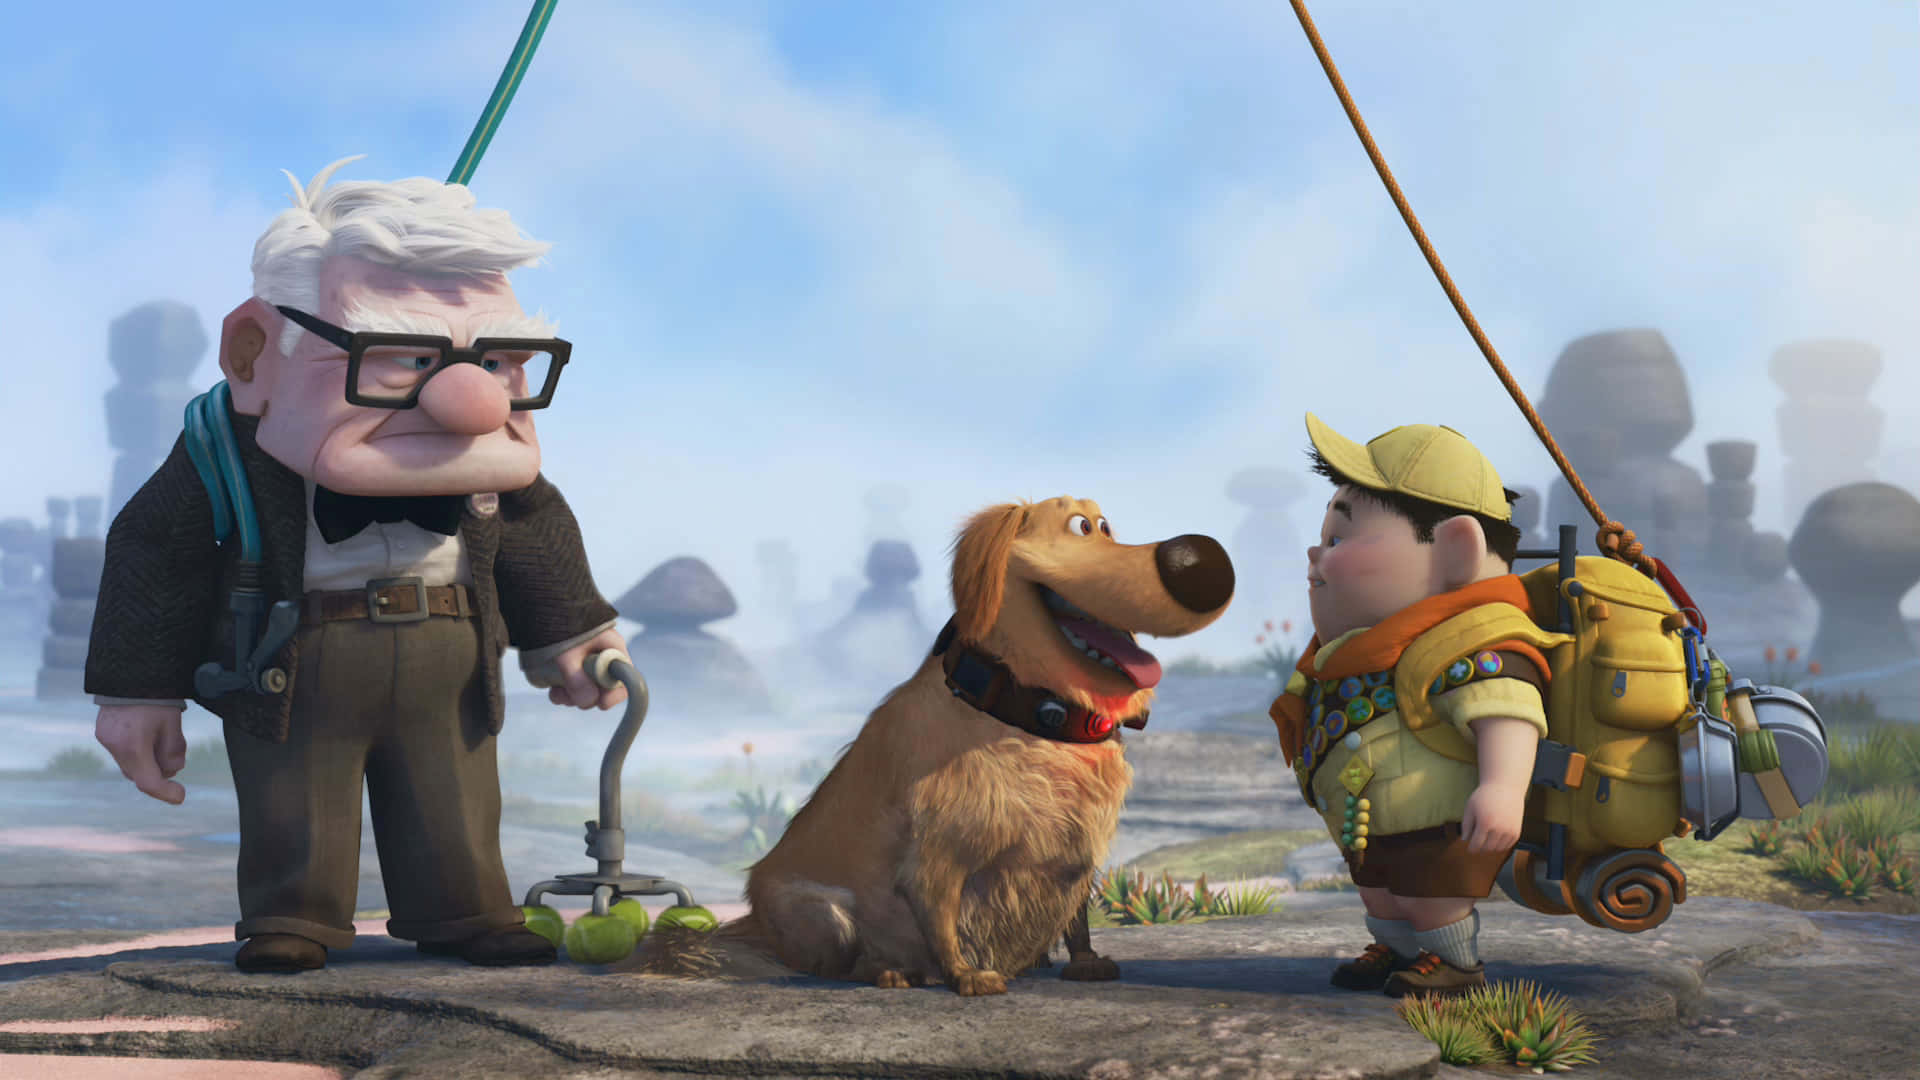 "Storytelling Comes To Life With Pixar"